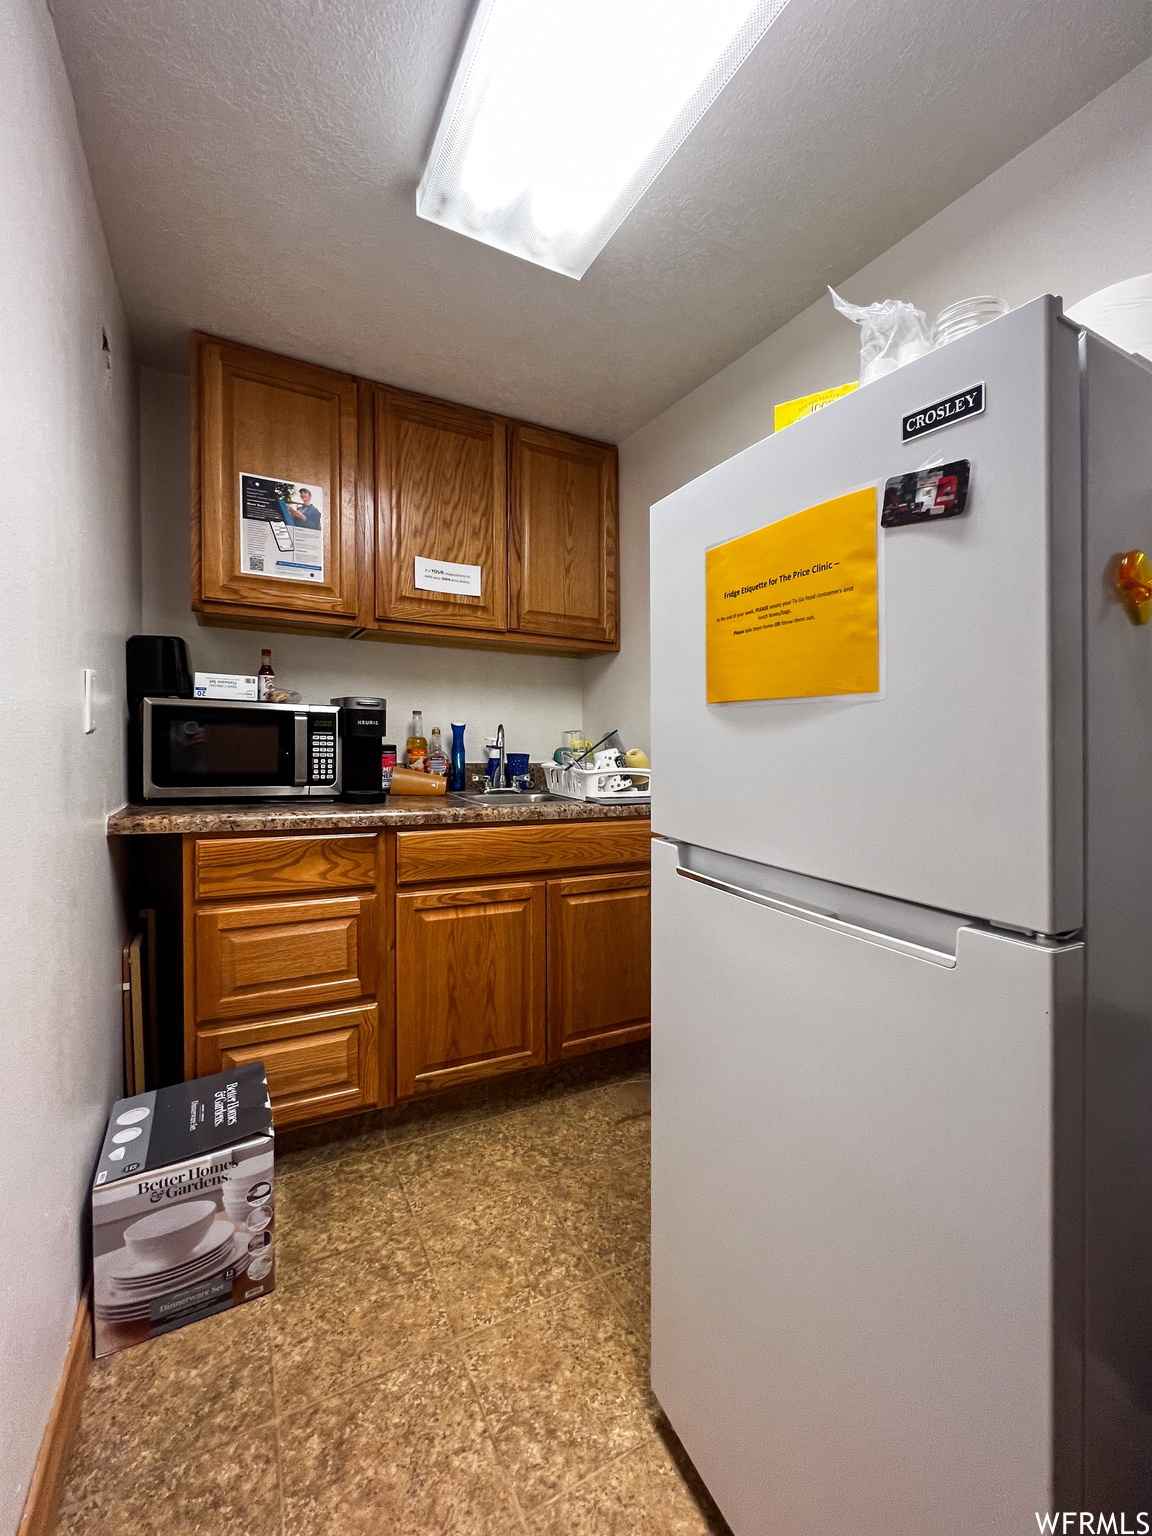 Break room with a textured ceiling, brown cabinets, white refrigerator, and tile flooring